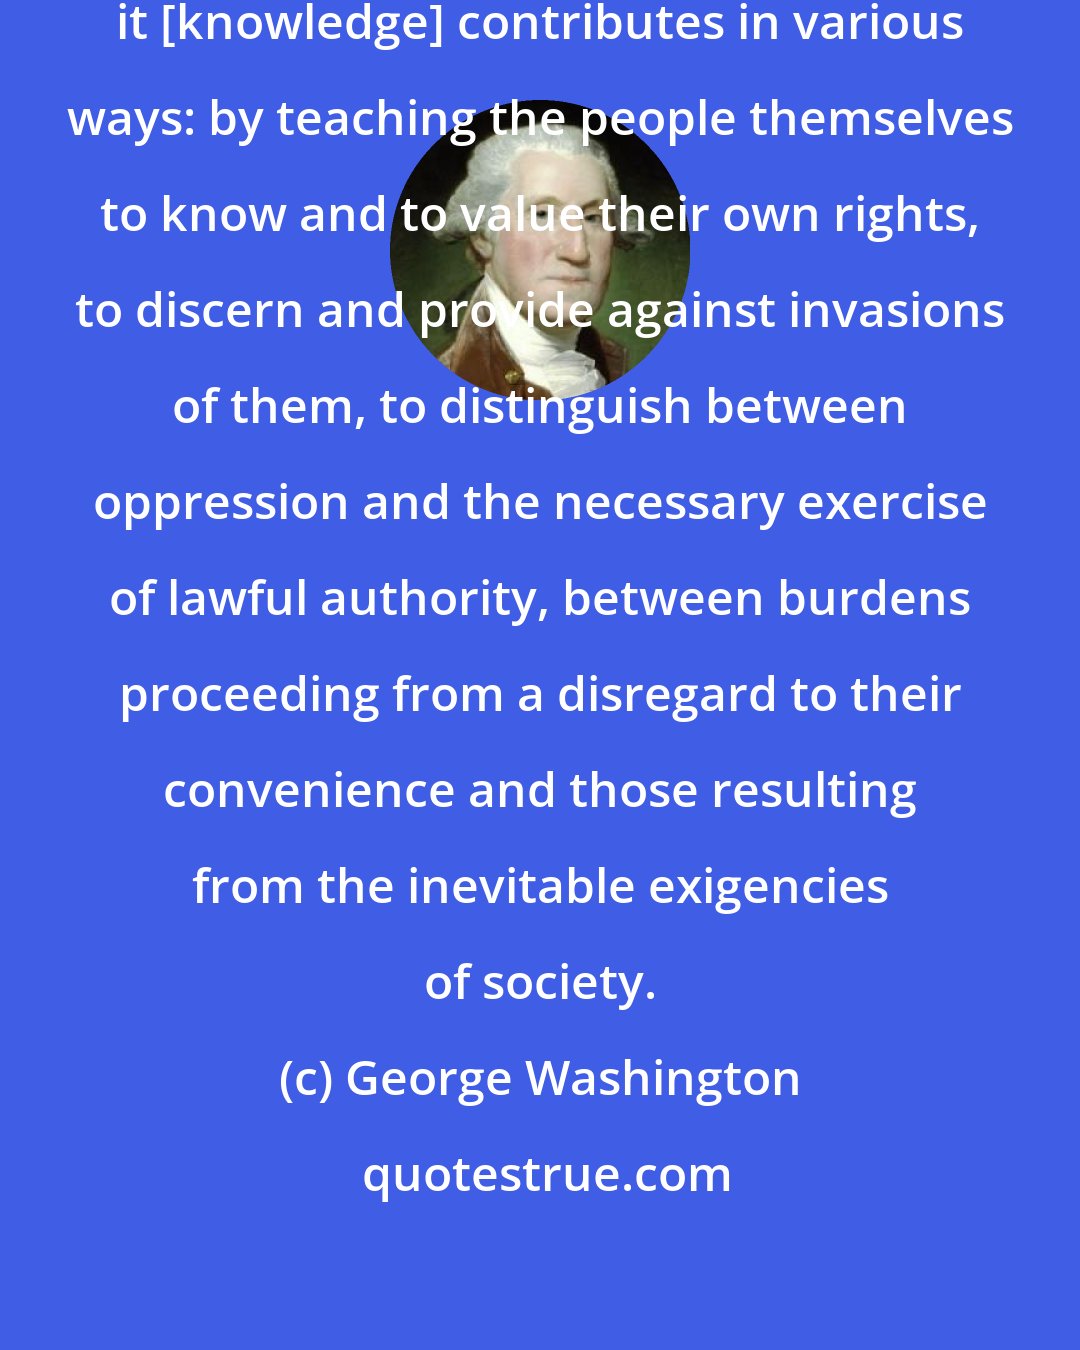 George Washington: To the security of a free Constitution it [knowledge] contributes in various ways: by teaching the people themselves to know and to value their own rights, to discern and provide against invasions of them, to distinguish between oppression and the necessary exercise of lawful authority, between burdens proceeding from a disregard to their convenience and those resulting from the inevitable exigencies of society.